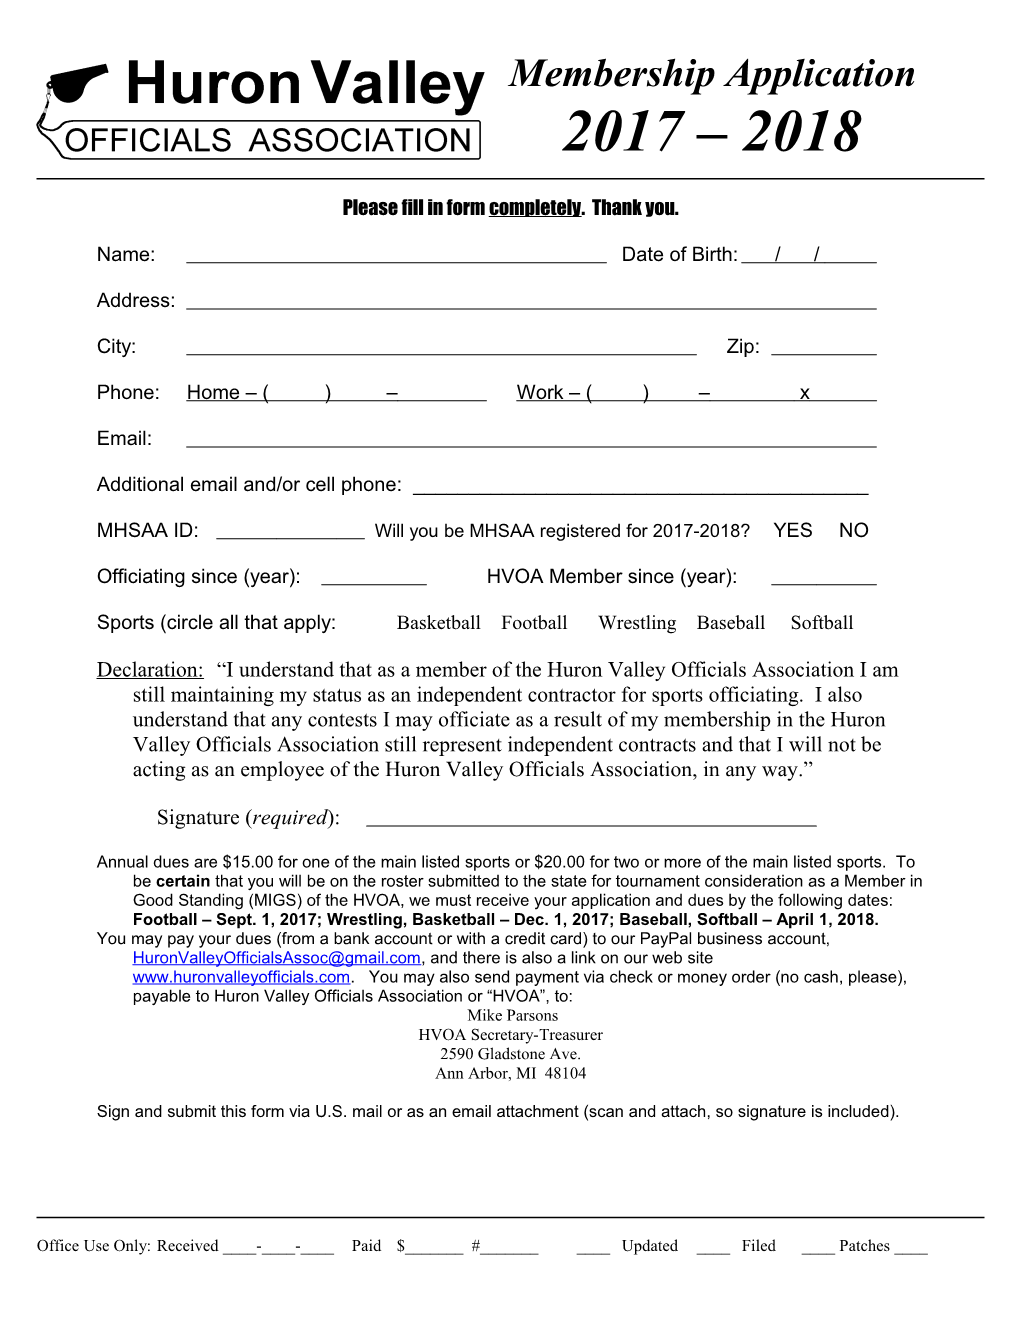 Please Fill in Form Completely